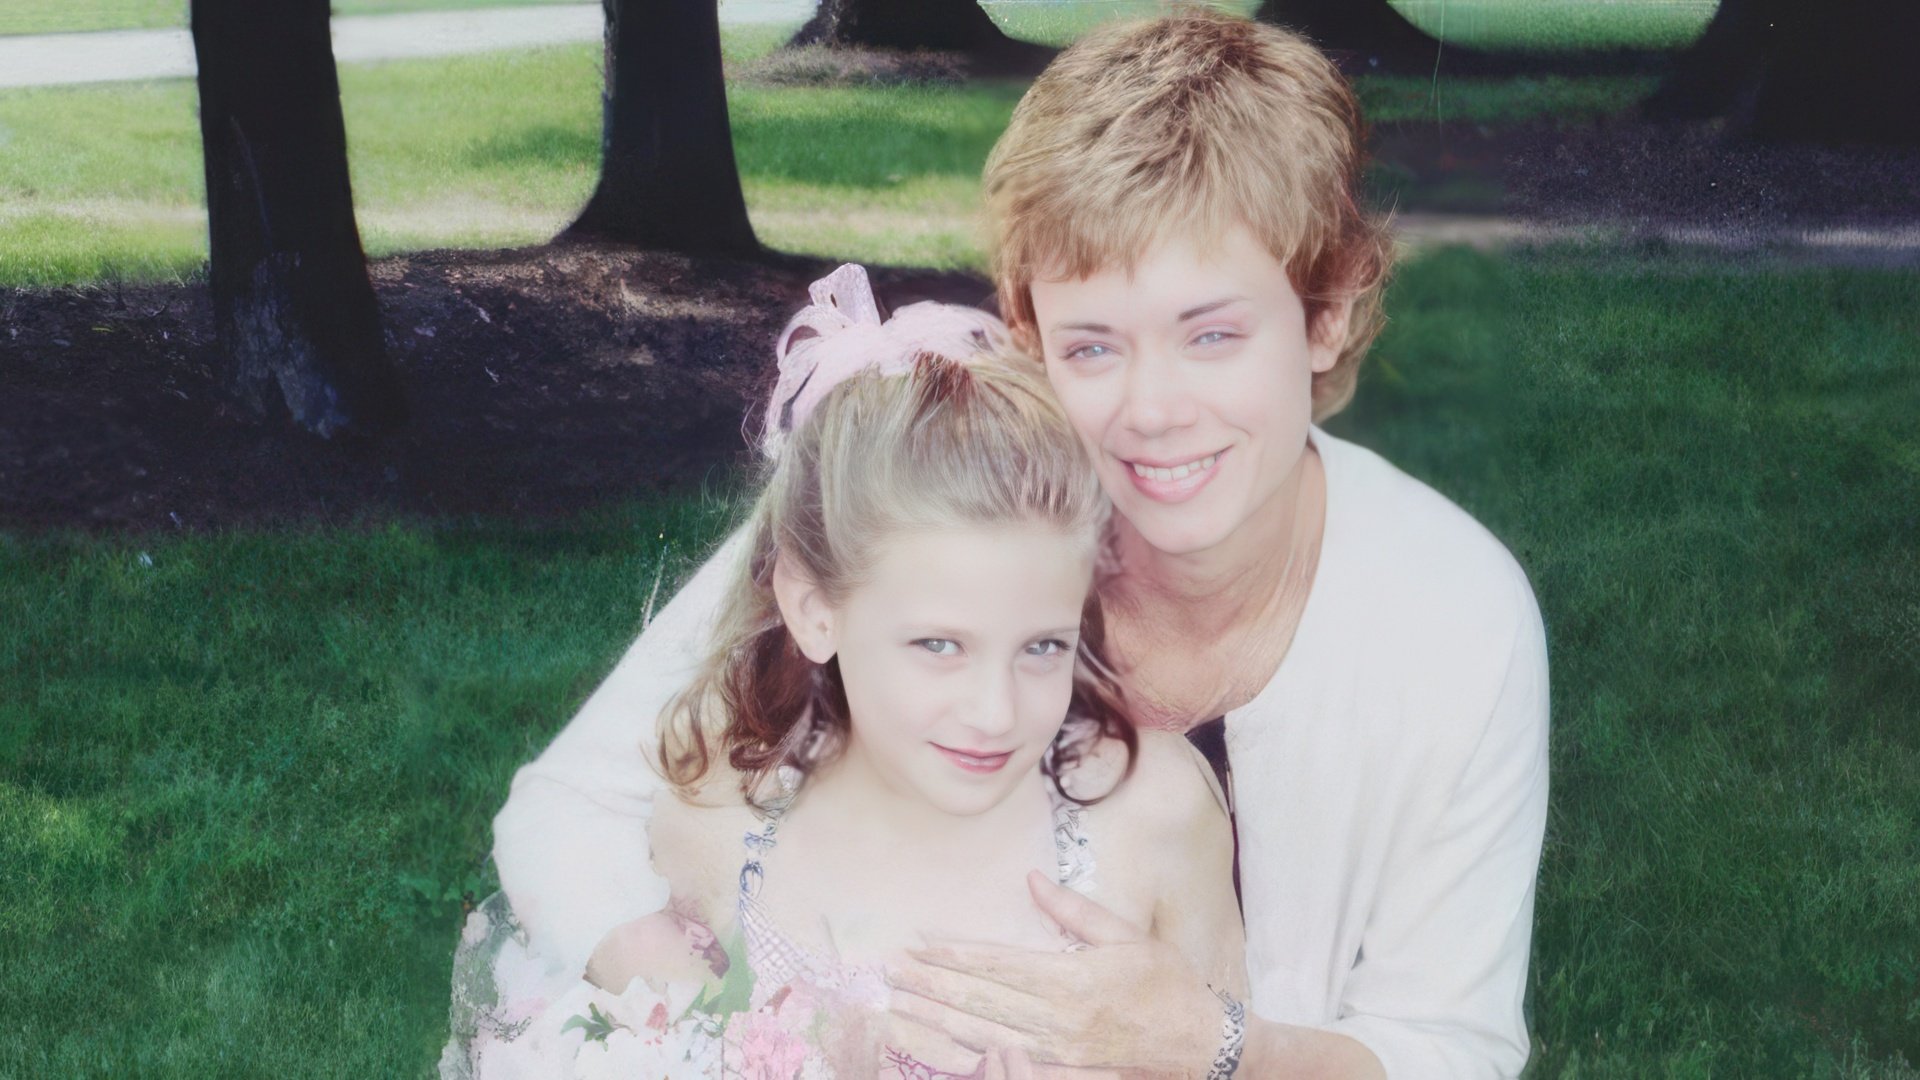 Lili Reinhart with her mom in childhood